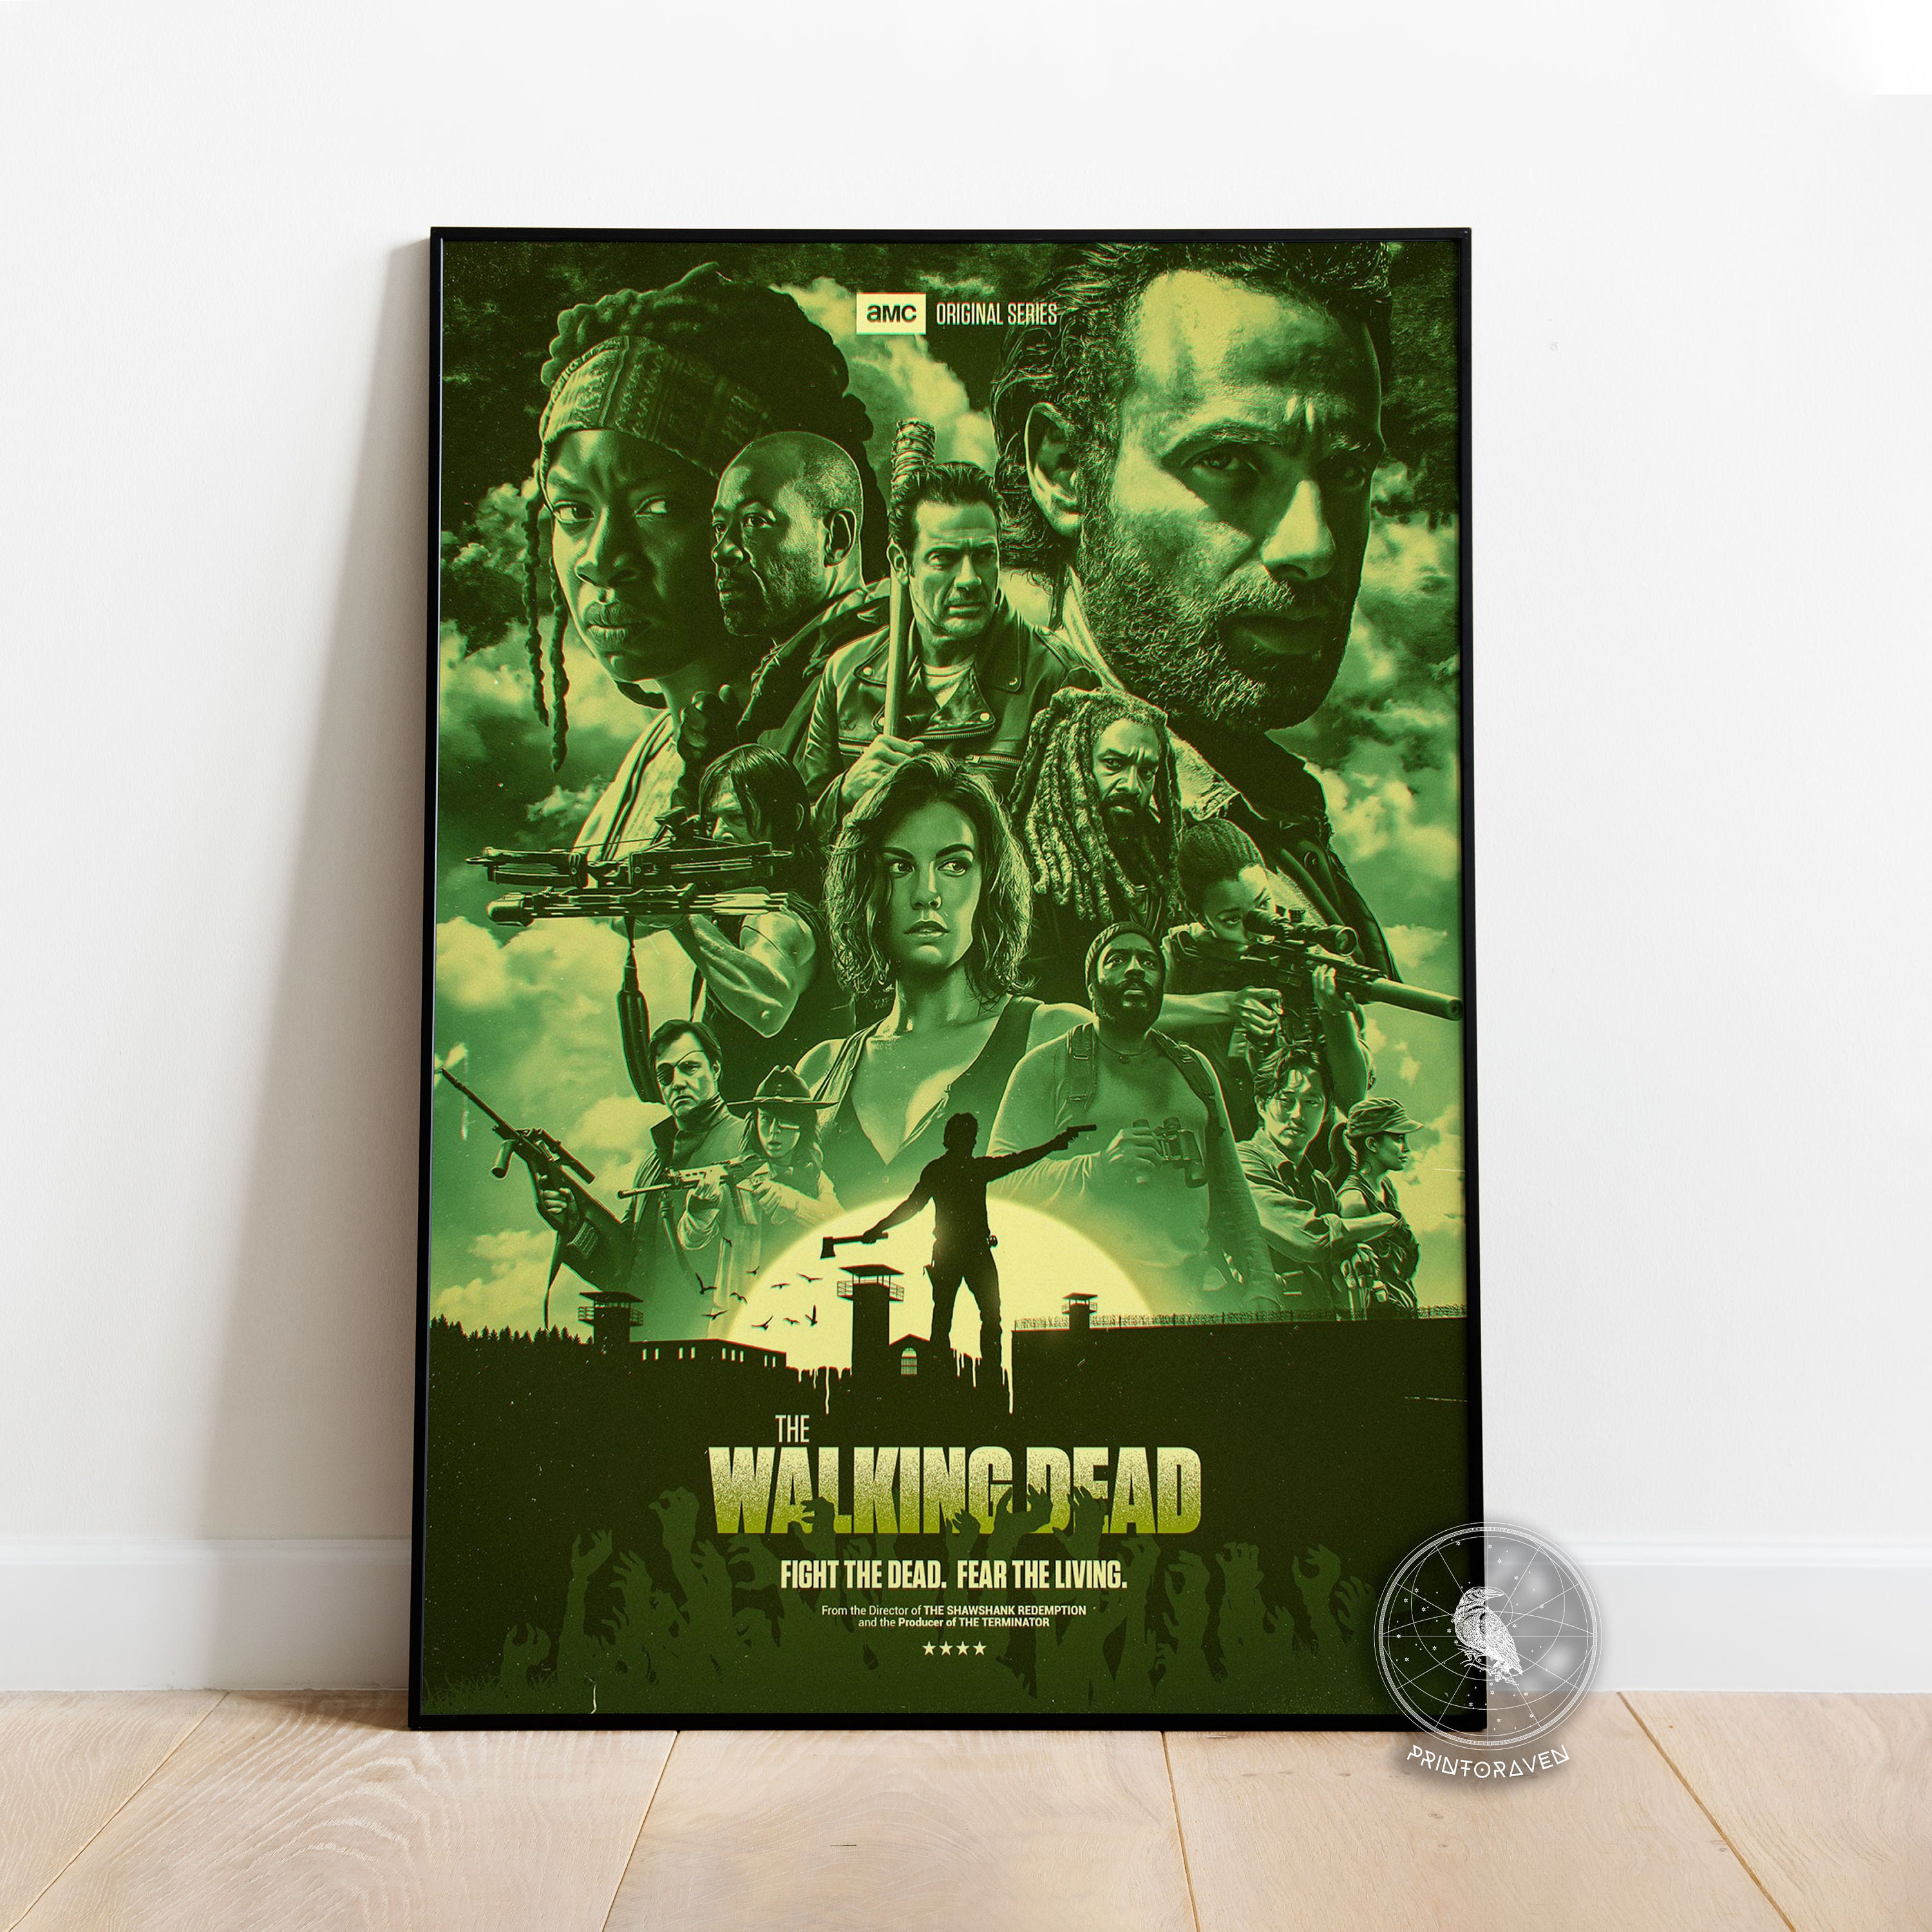 The Walking Dead Poster, Printable Download, Walking Dead Printable Wall  Art, Home Decor, Walking Dead Download, Walking Dead Poster 